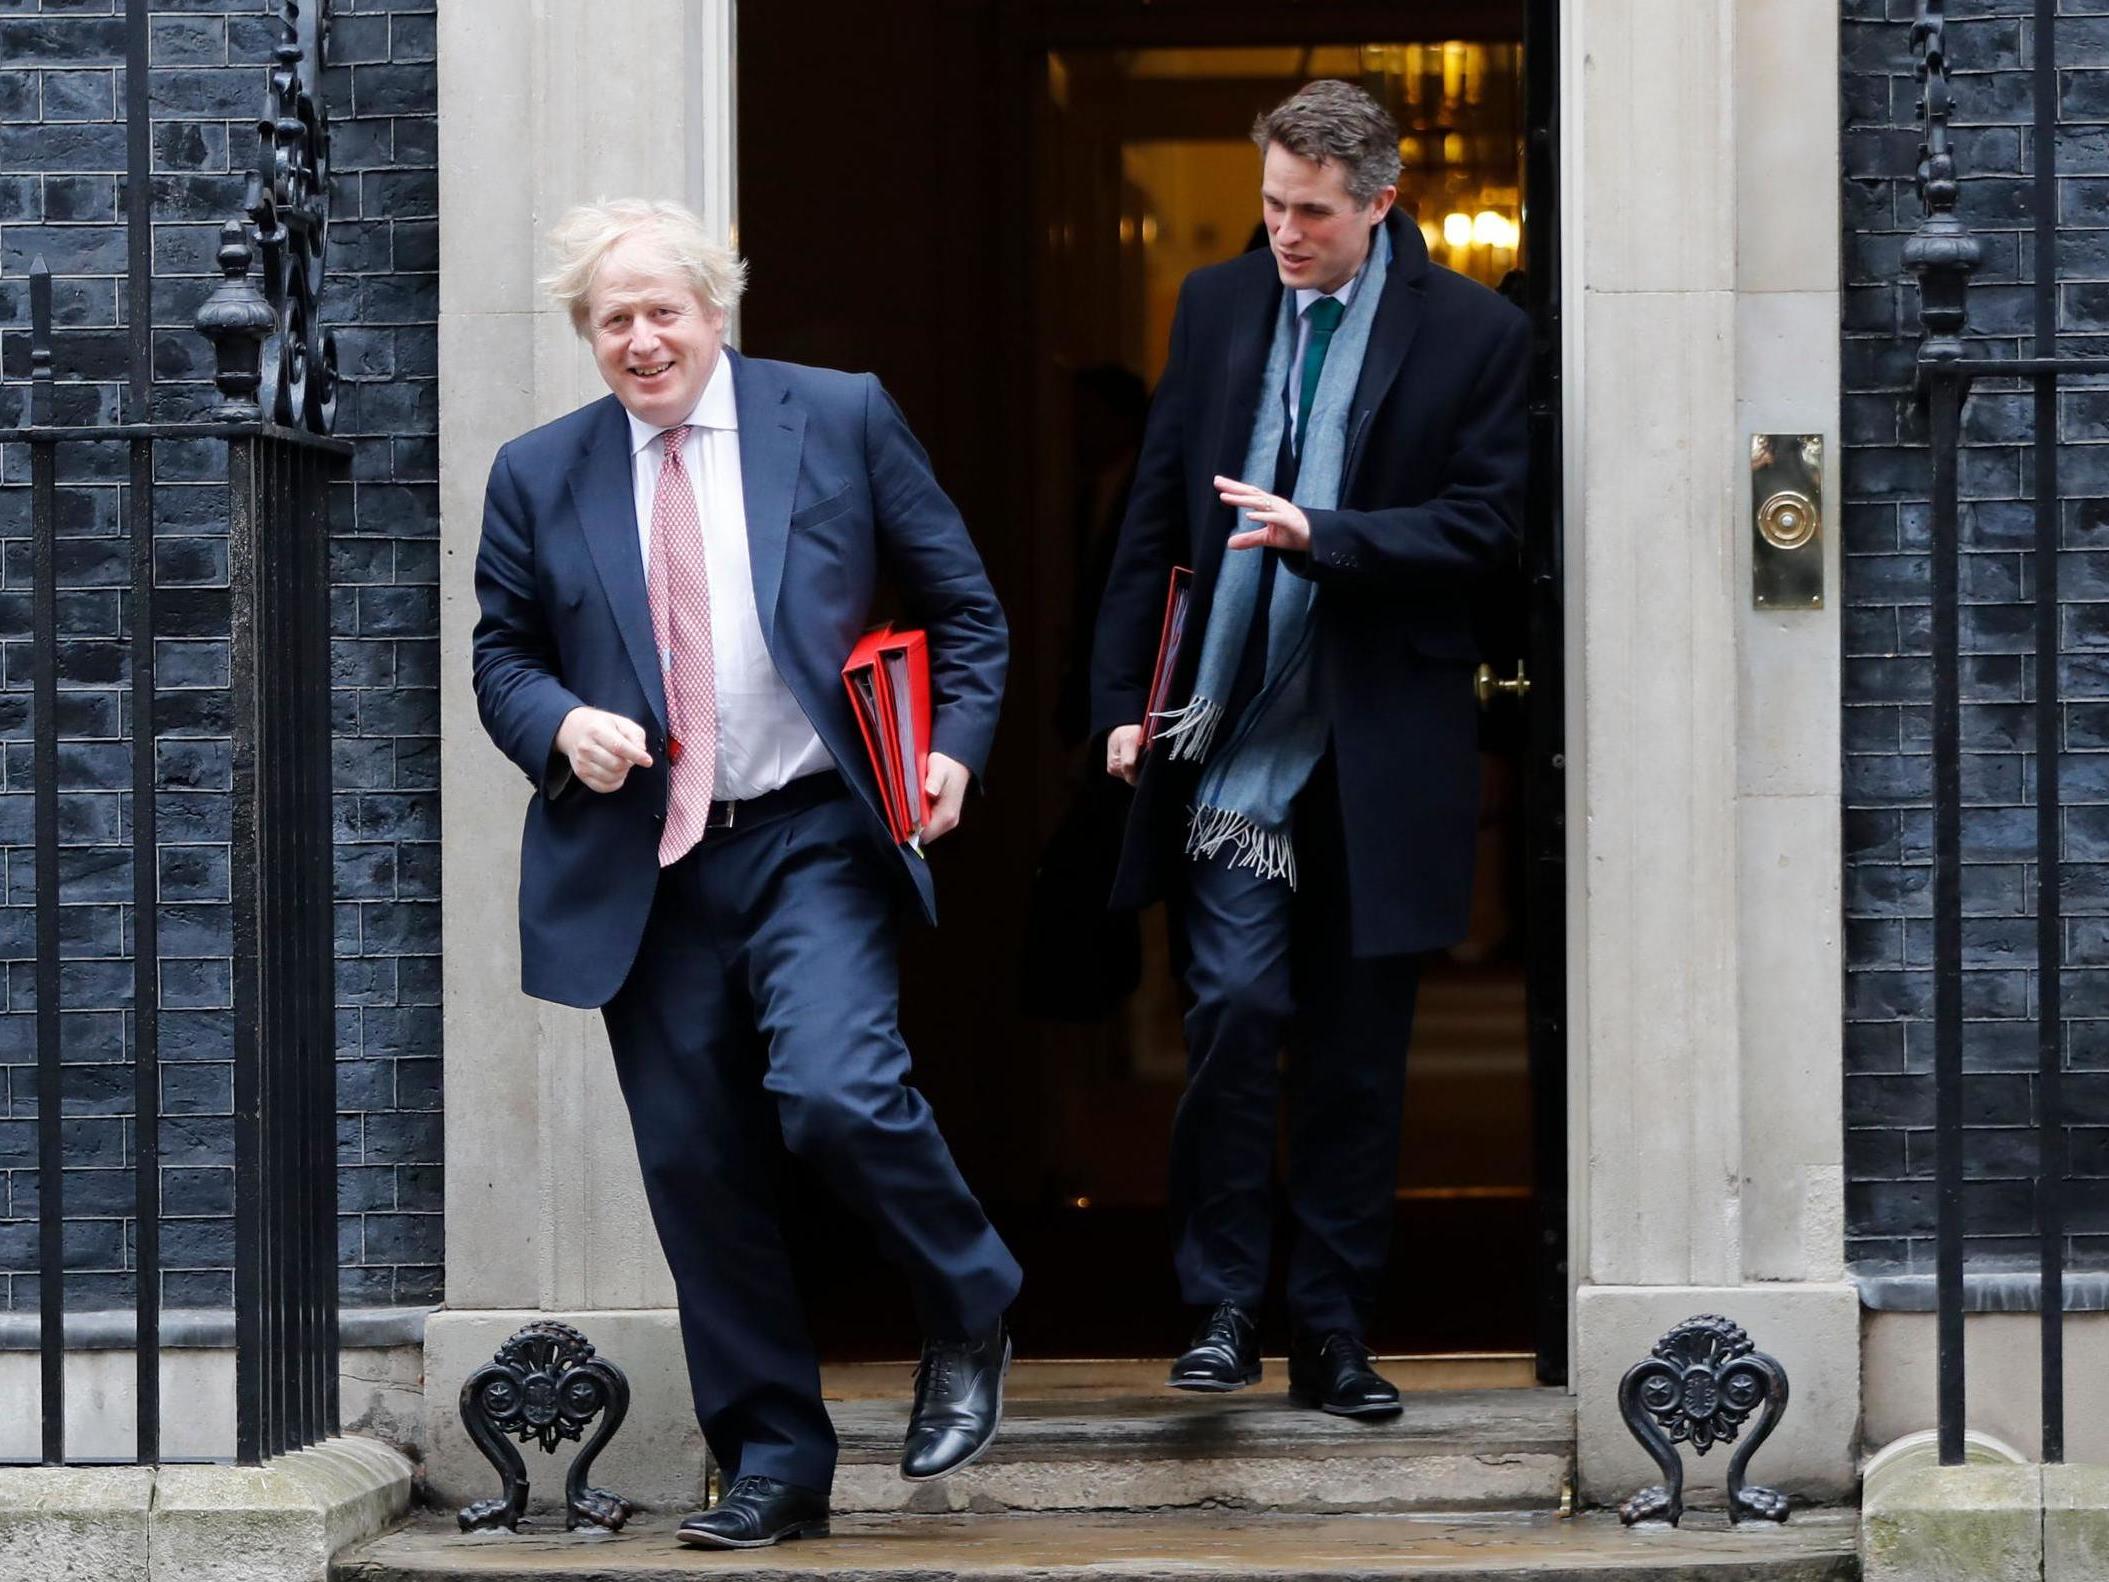 Happier times: Williamson and Boris Johnson leave No 10 following a cabinet meeting in March 2018